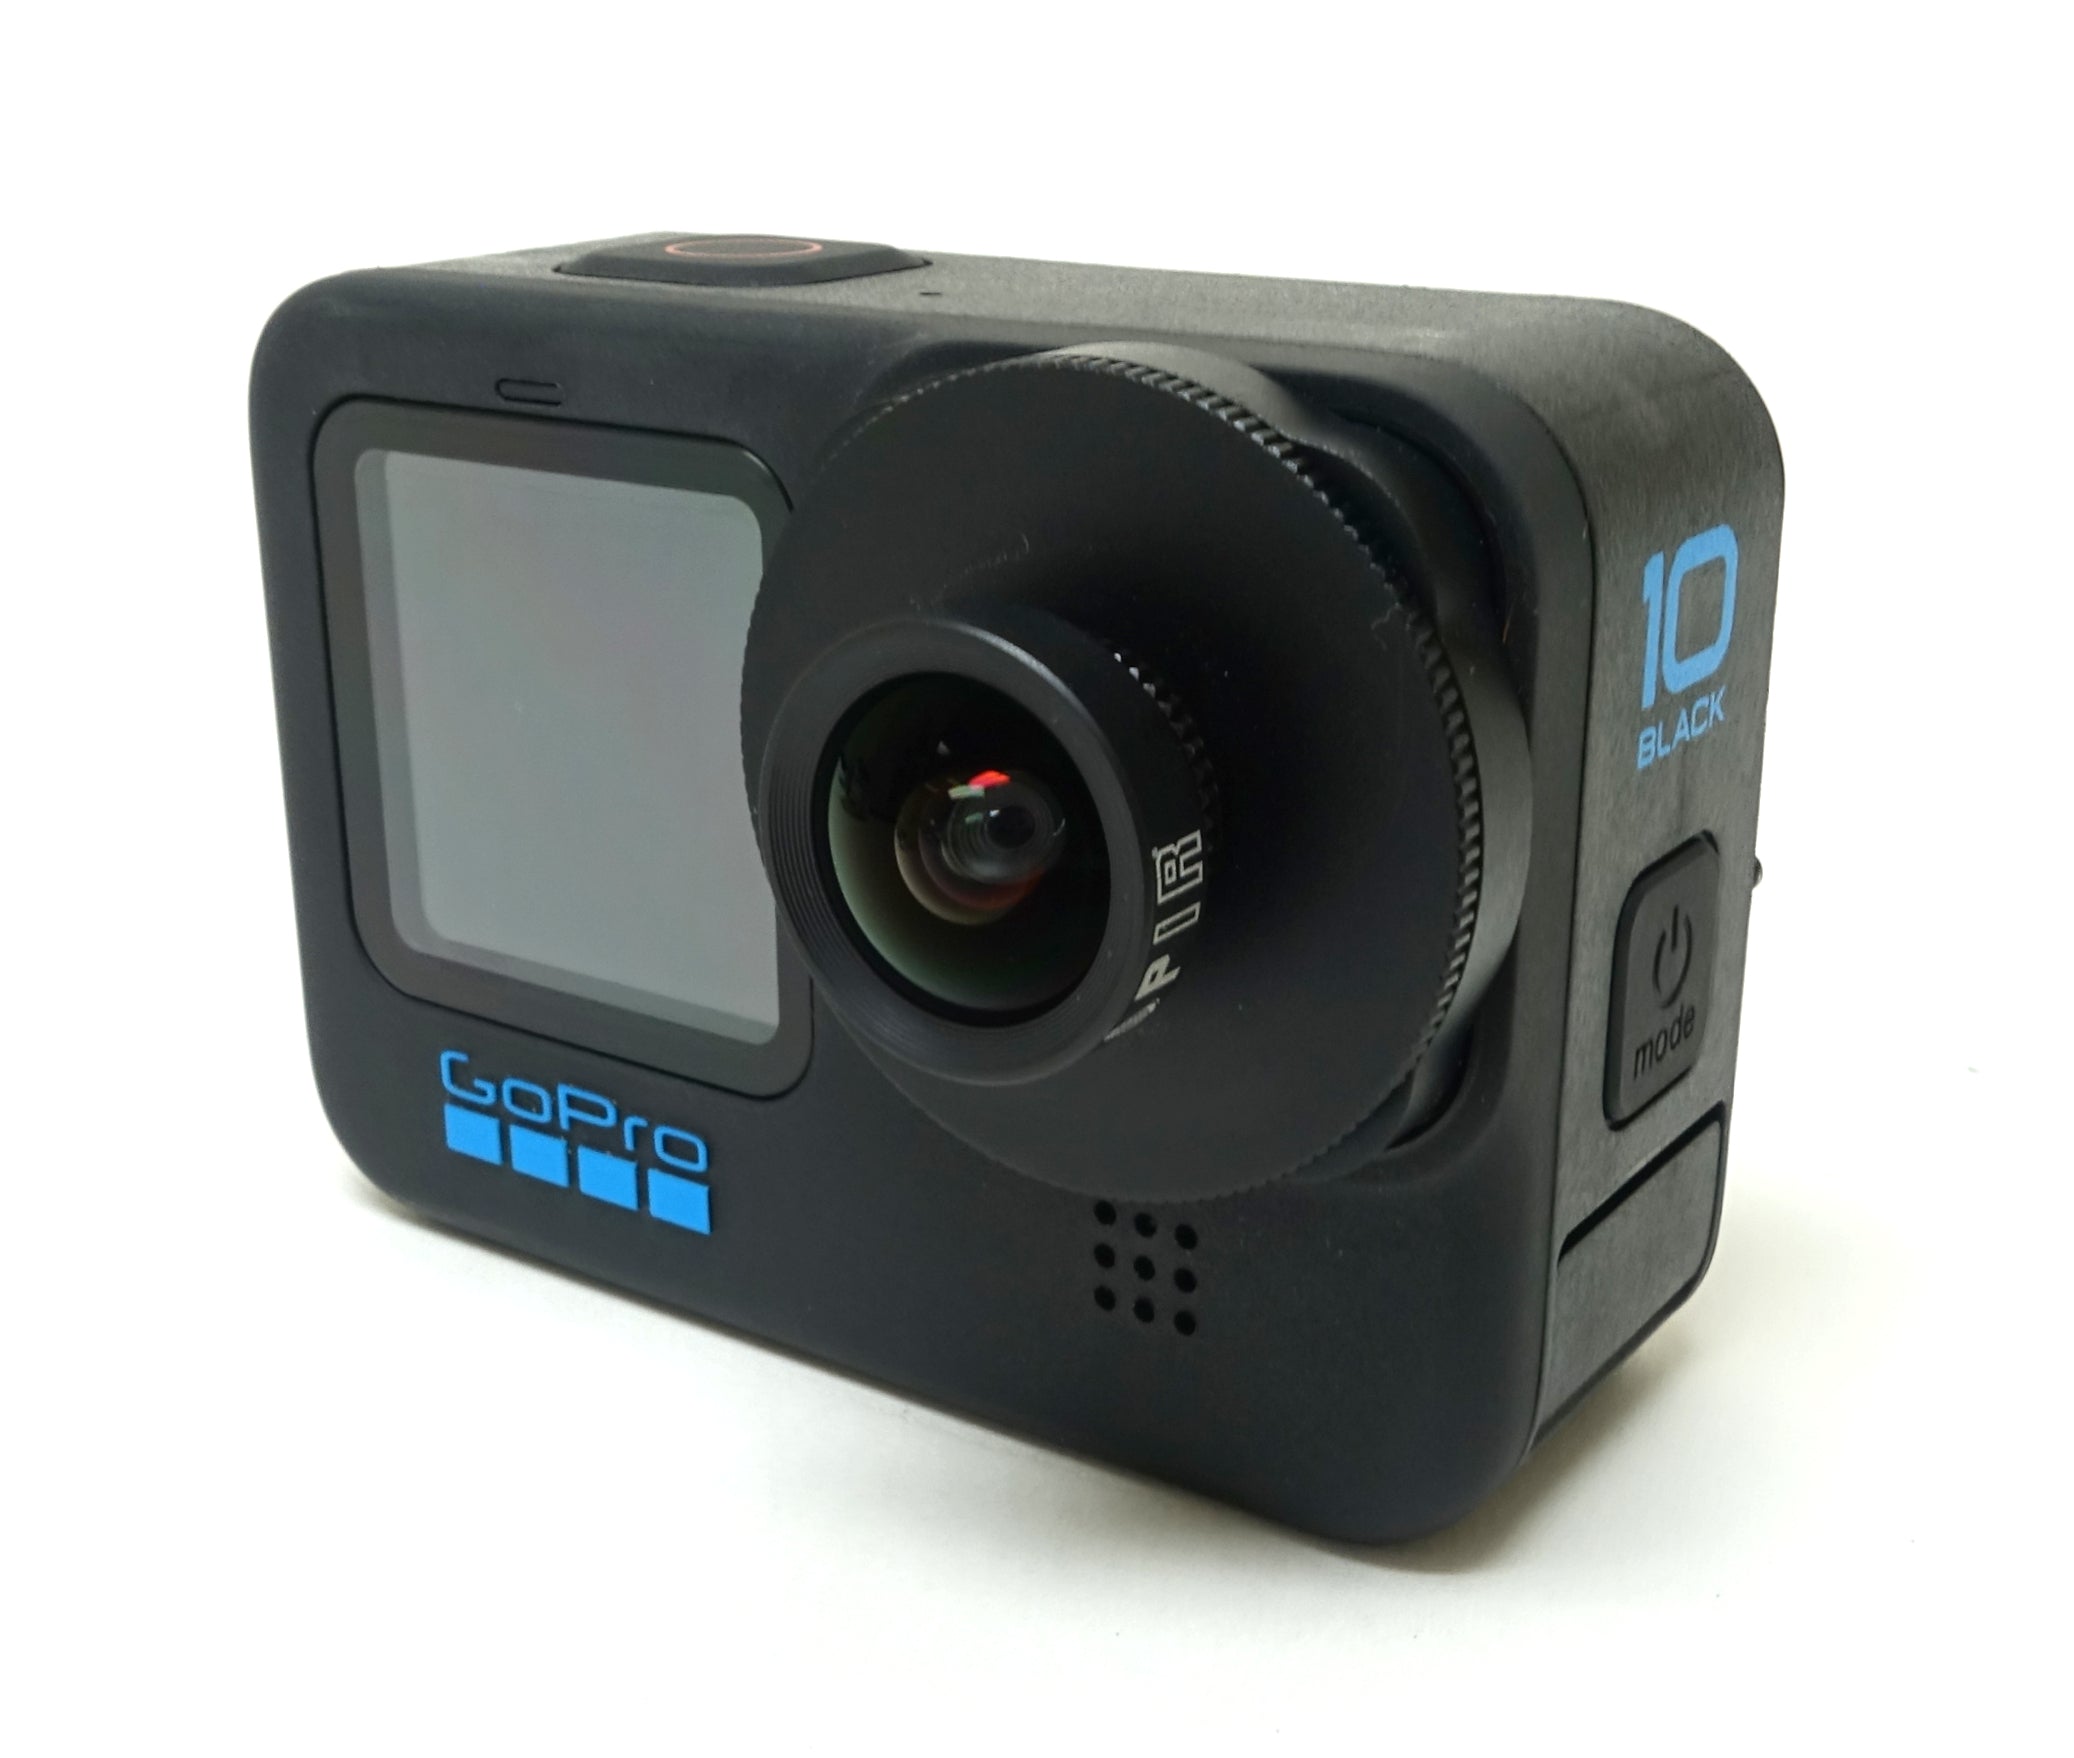 Phen X Frame Support GoPro Universel FHC by Phen X Frame